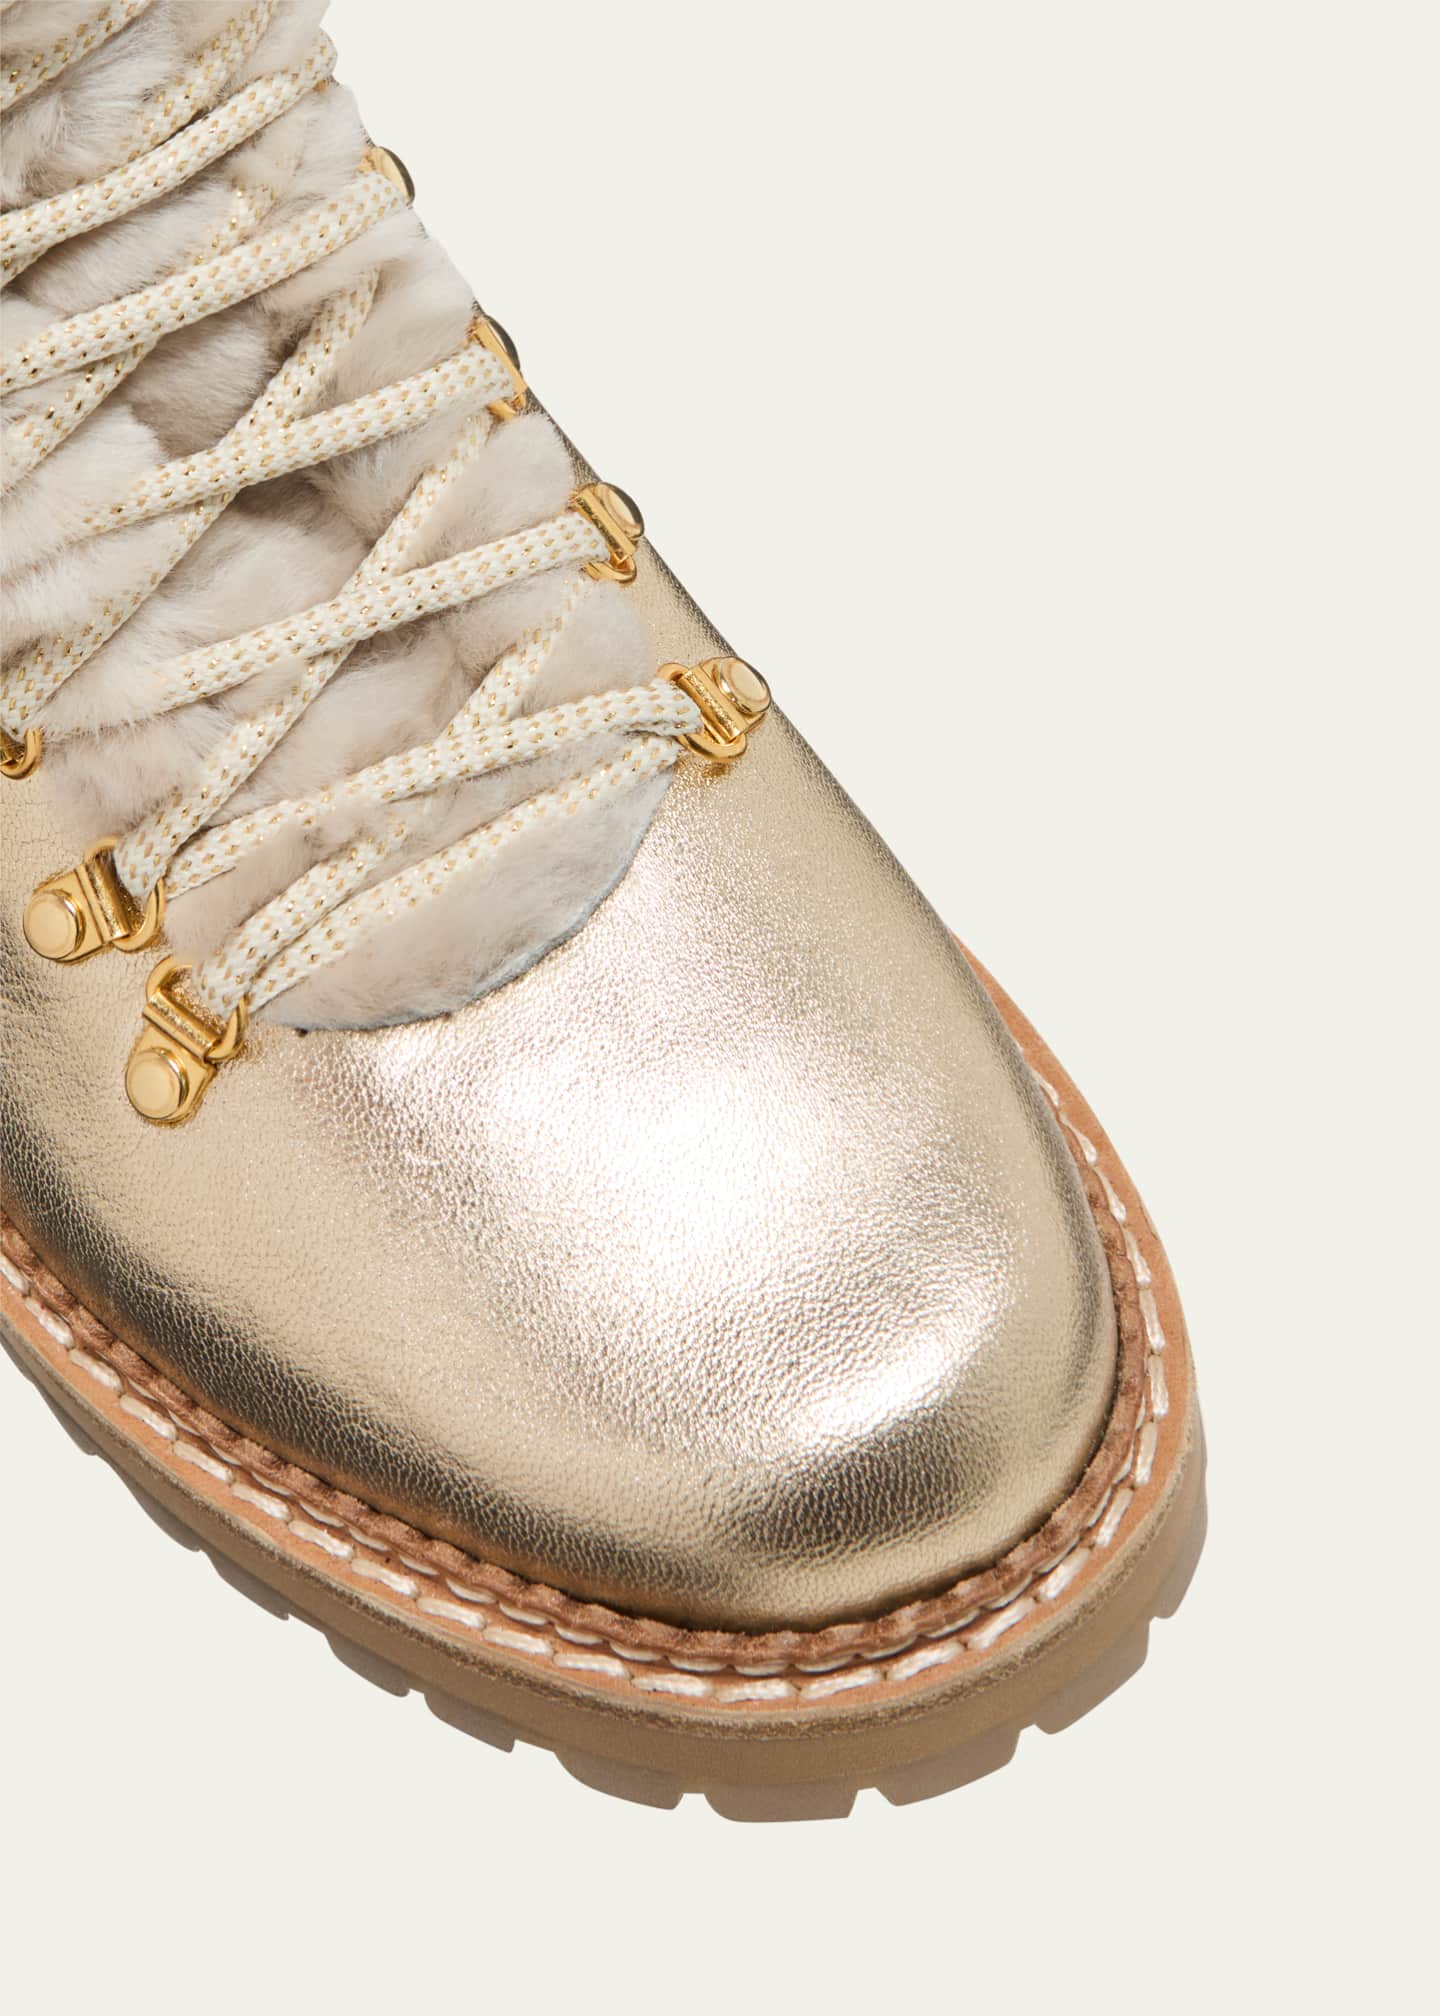 Montelliana 1965 Metallic Leather Shearling-Lined Hiking Boots ...